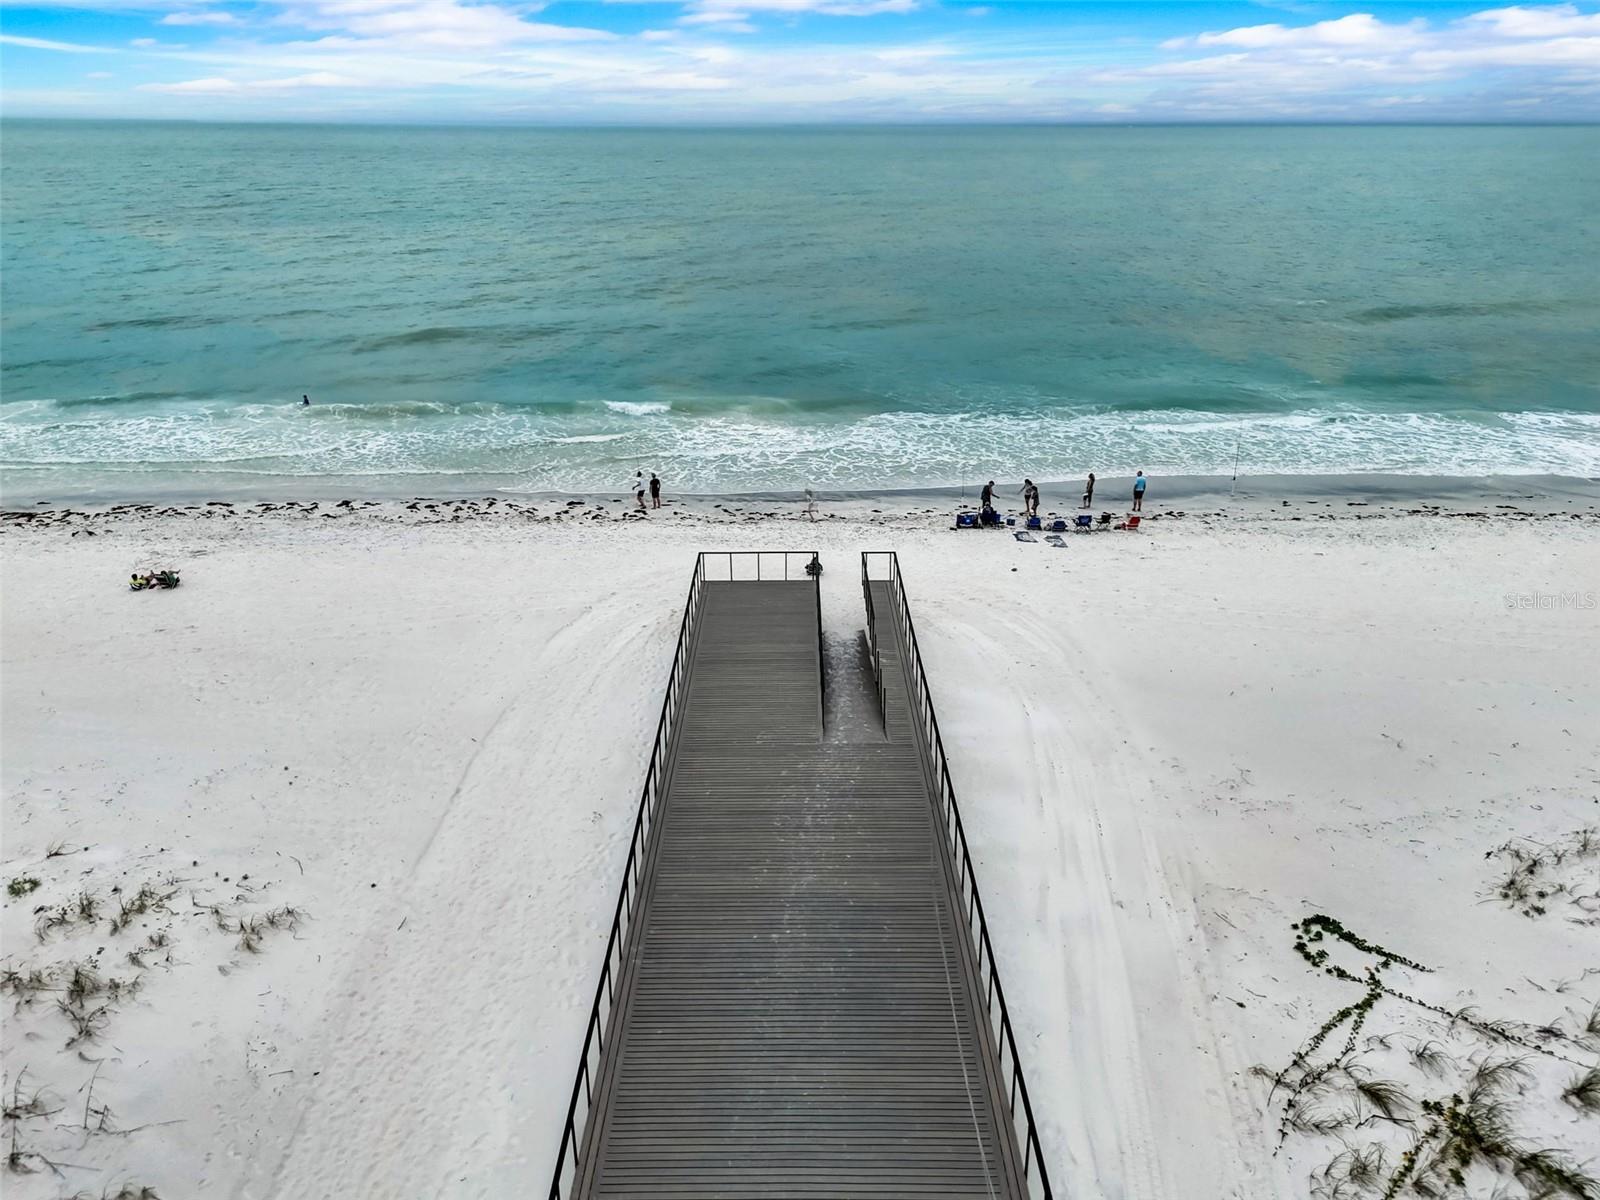 New Pier!  Walk Out Over the Sand and Enjoy the View.